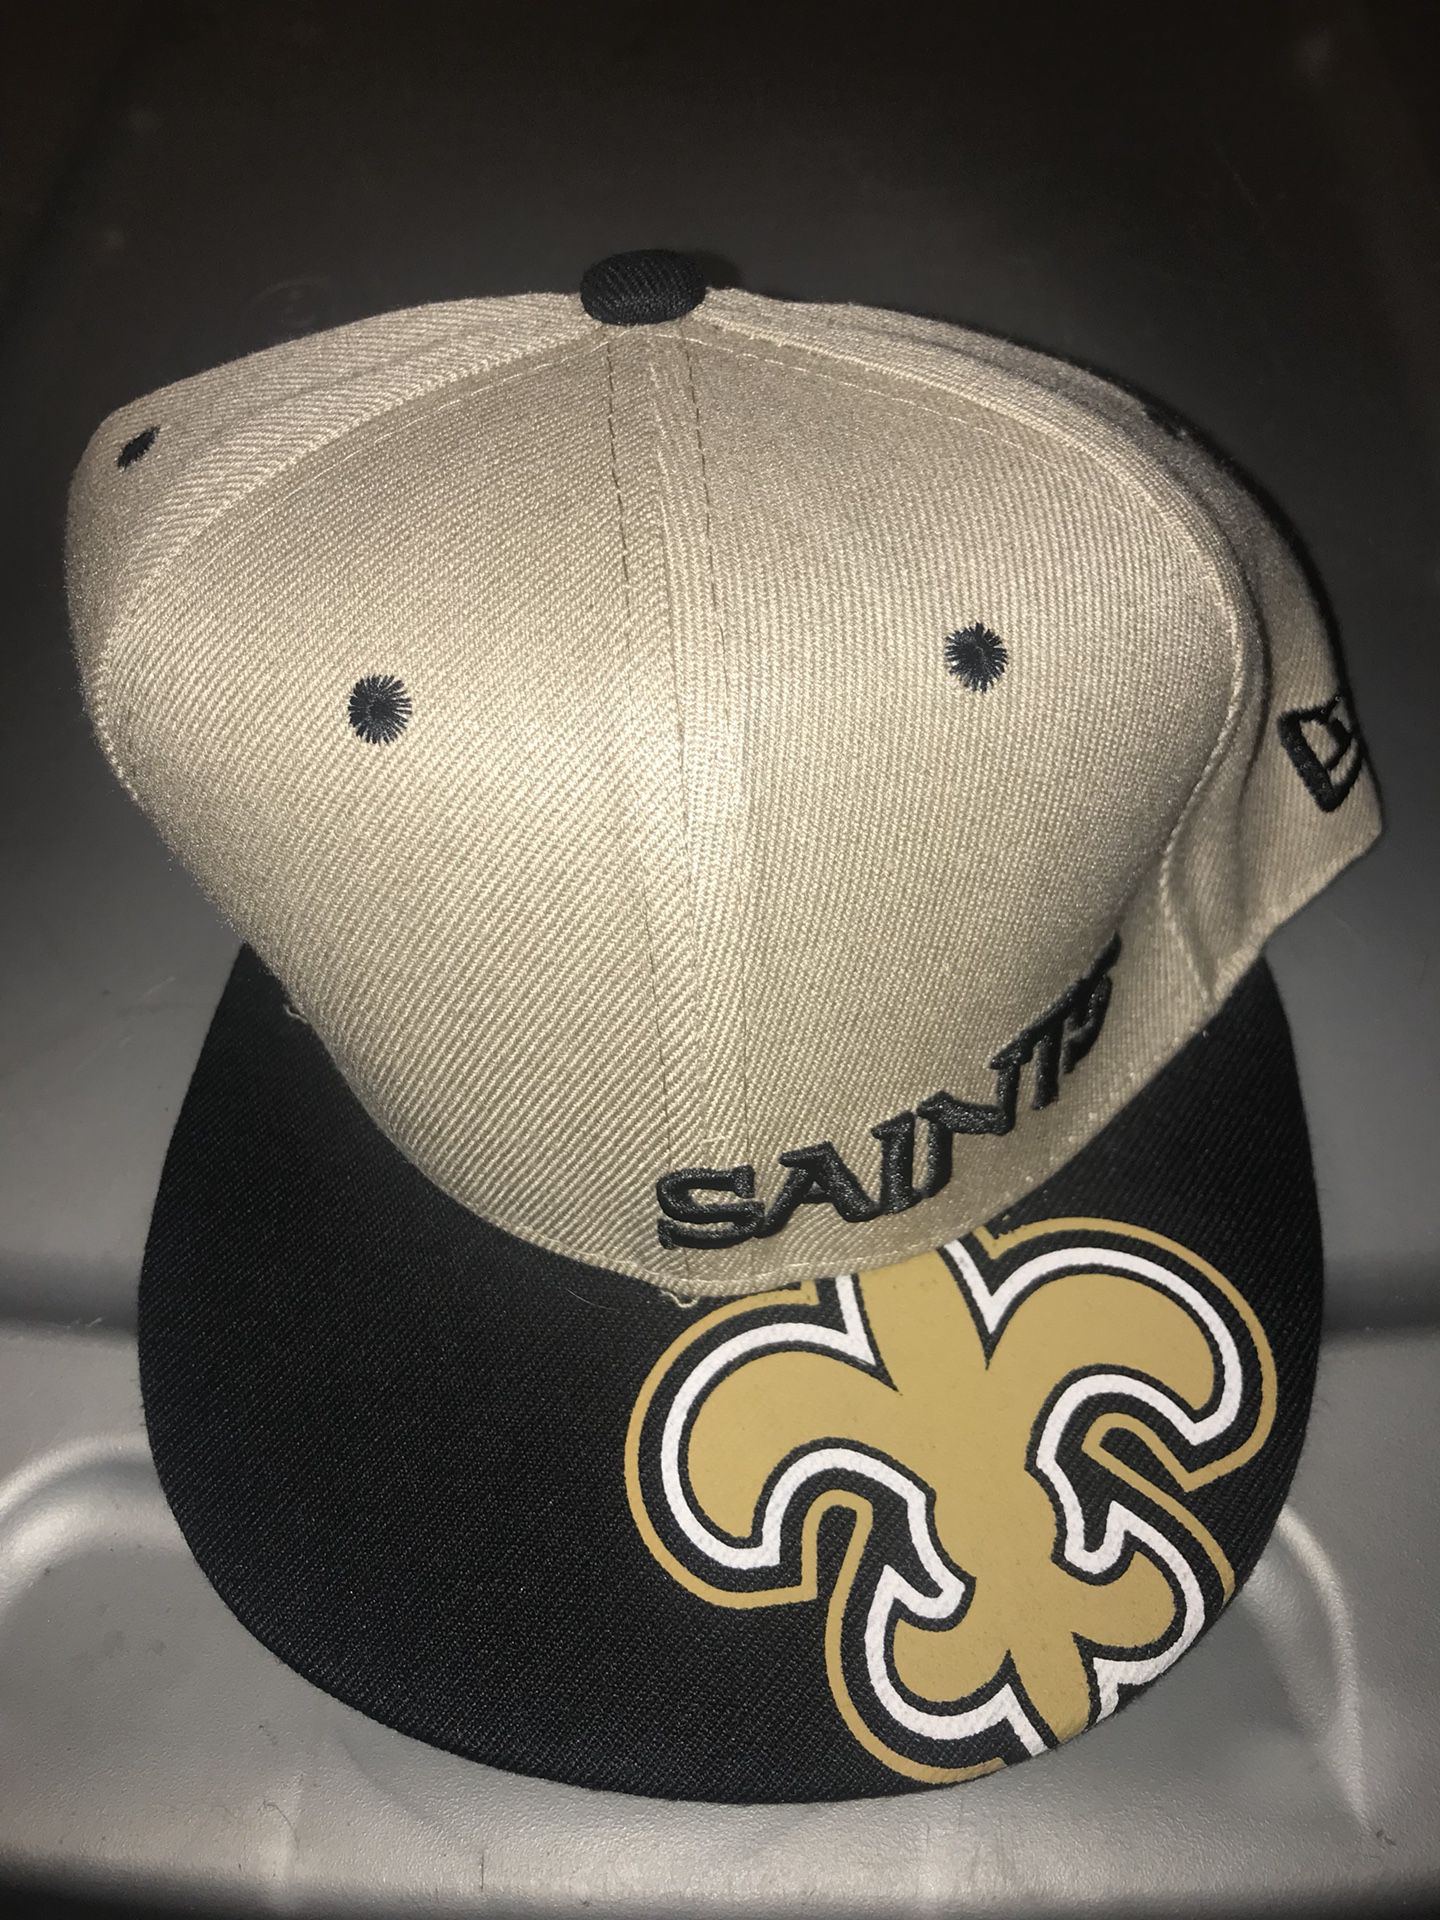 New Orleans saints 9 fifty snap back hat NWT